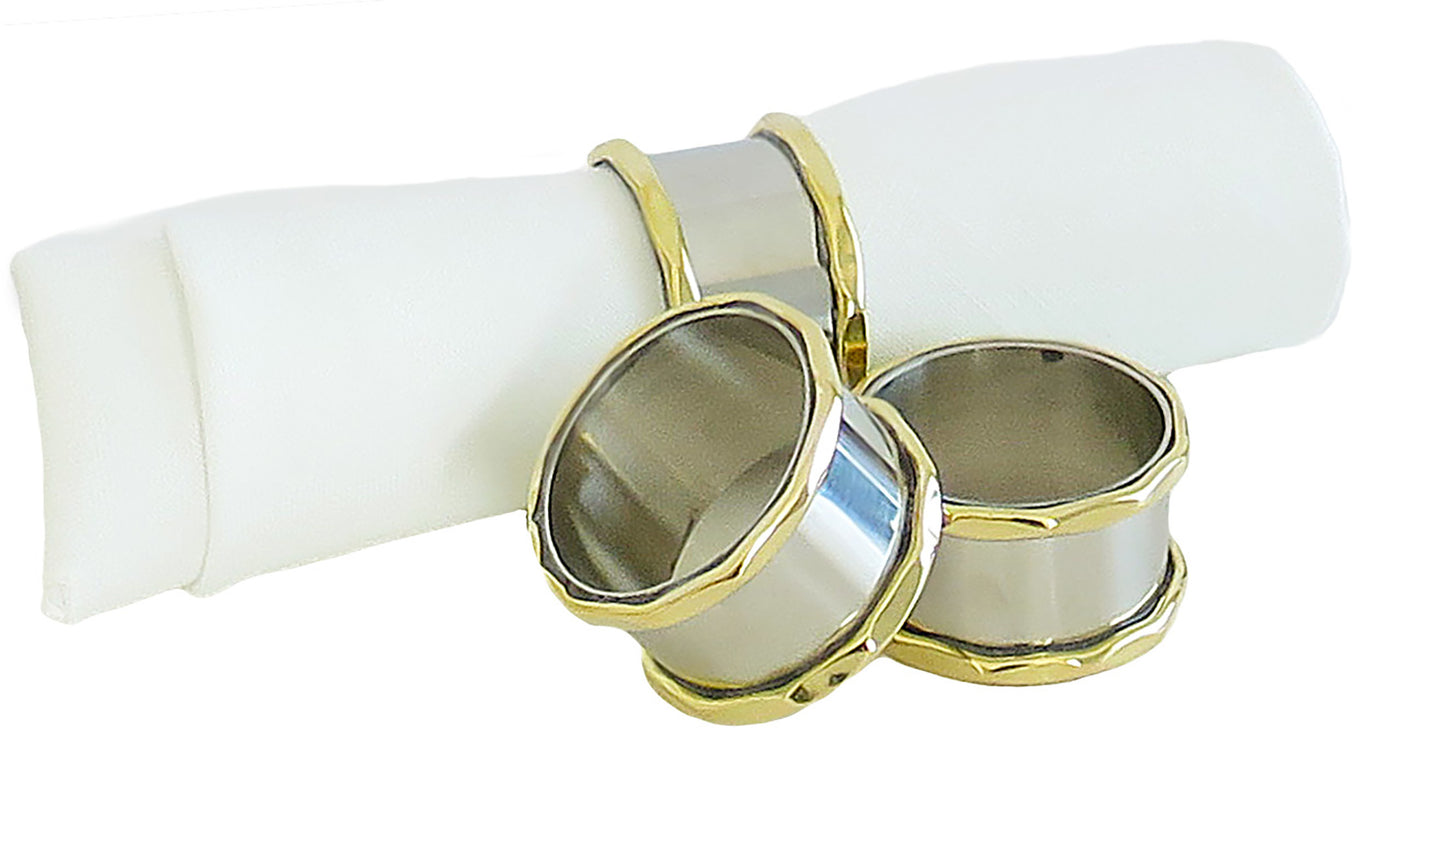 Set of 4 Stainless Steel Napkin Holders with Gold Border